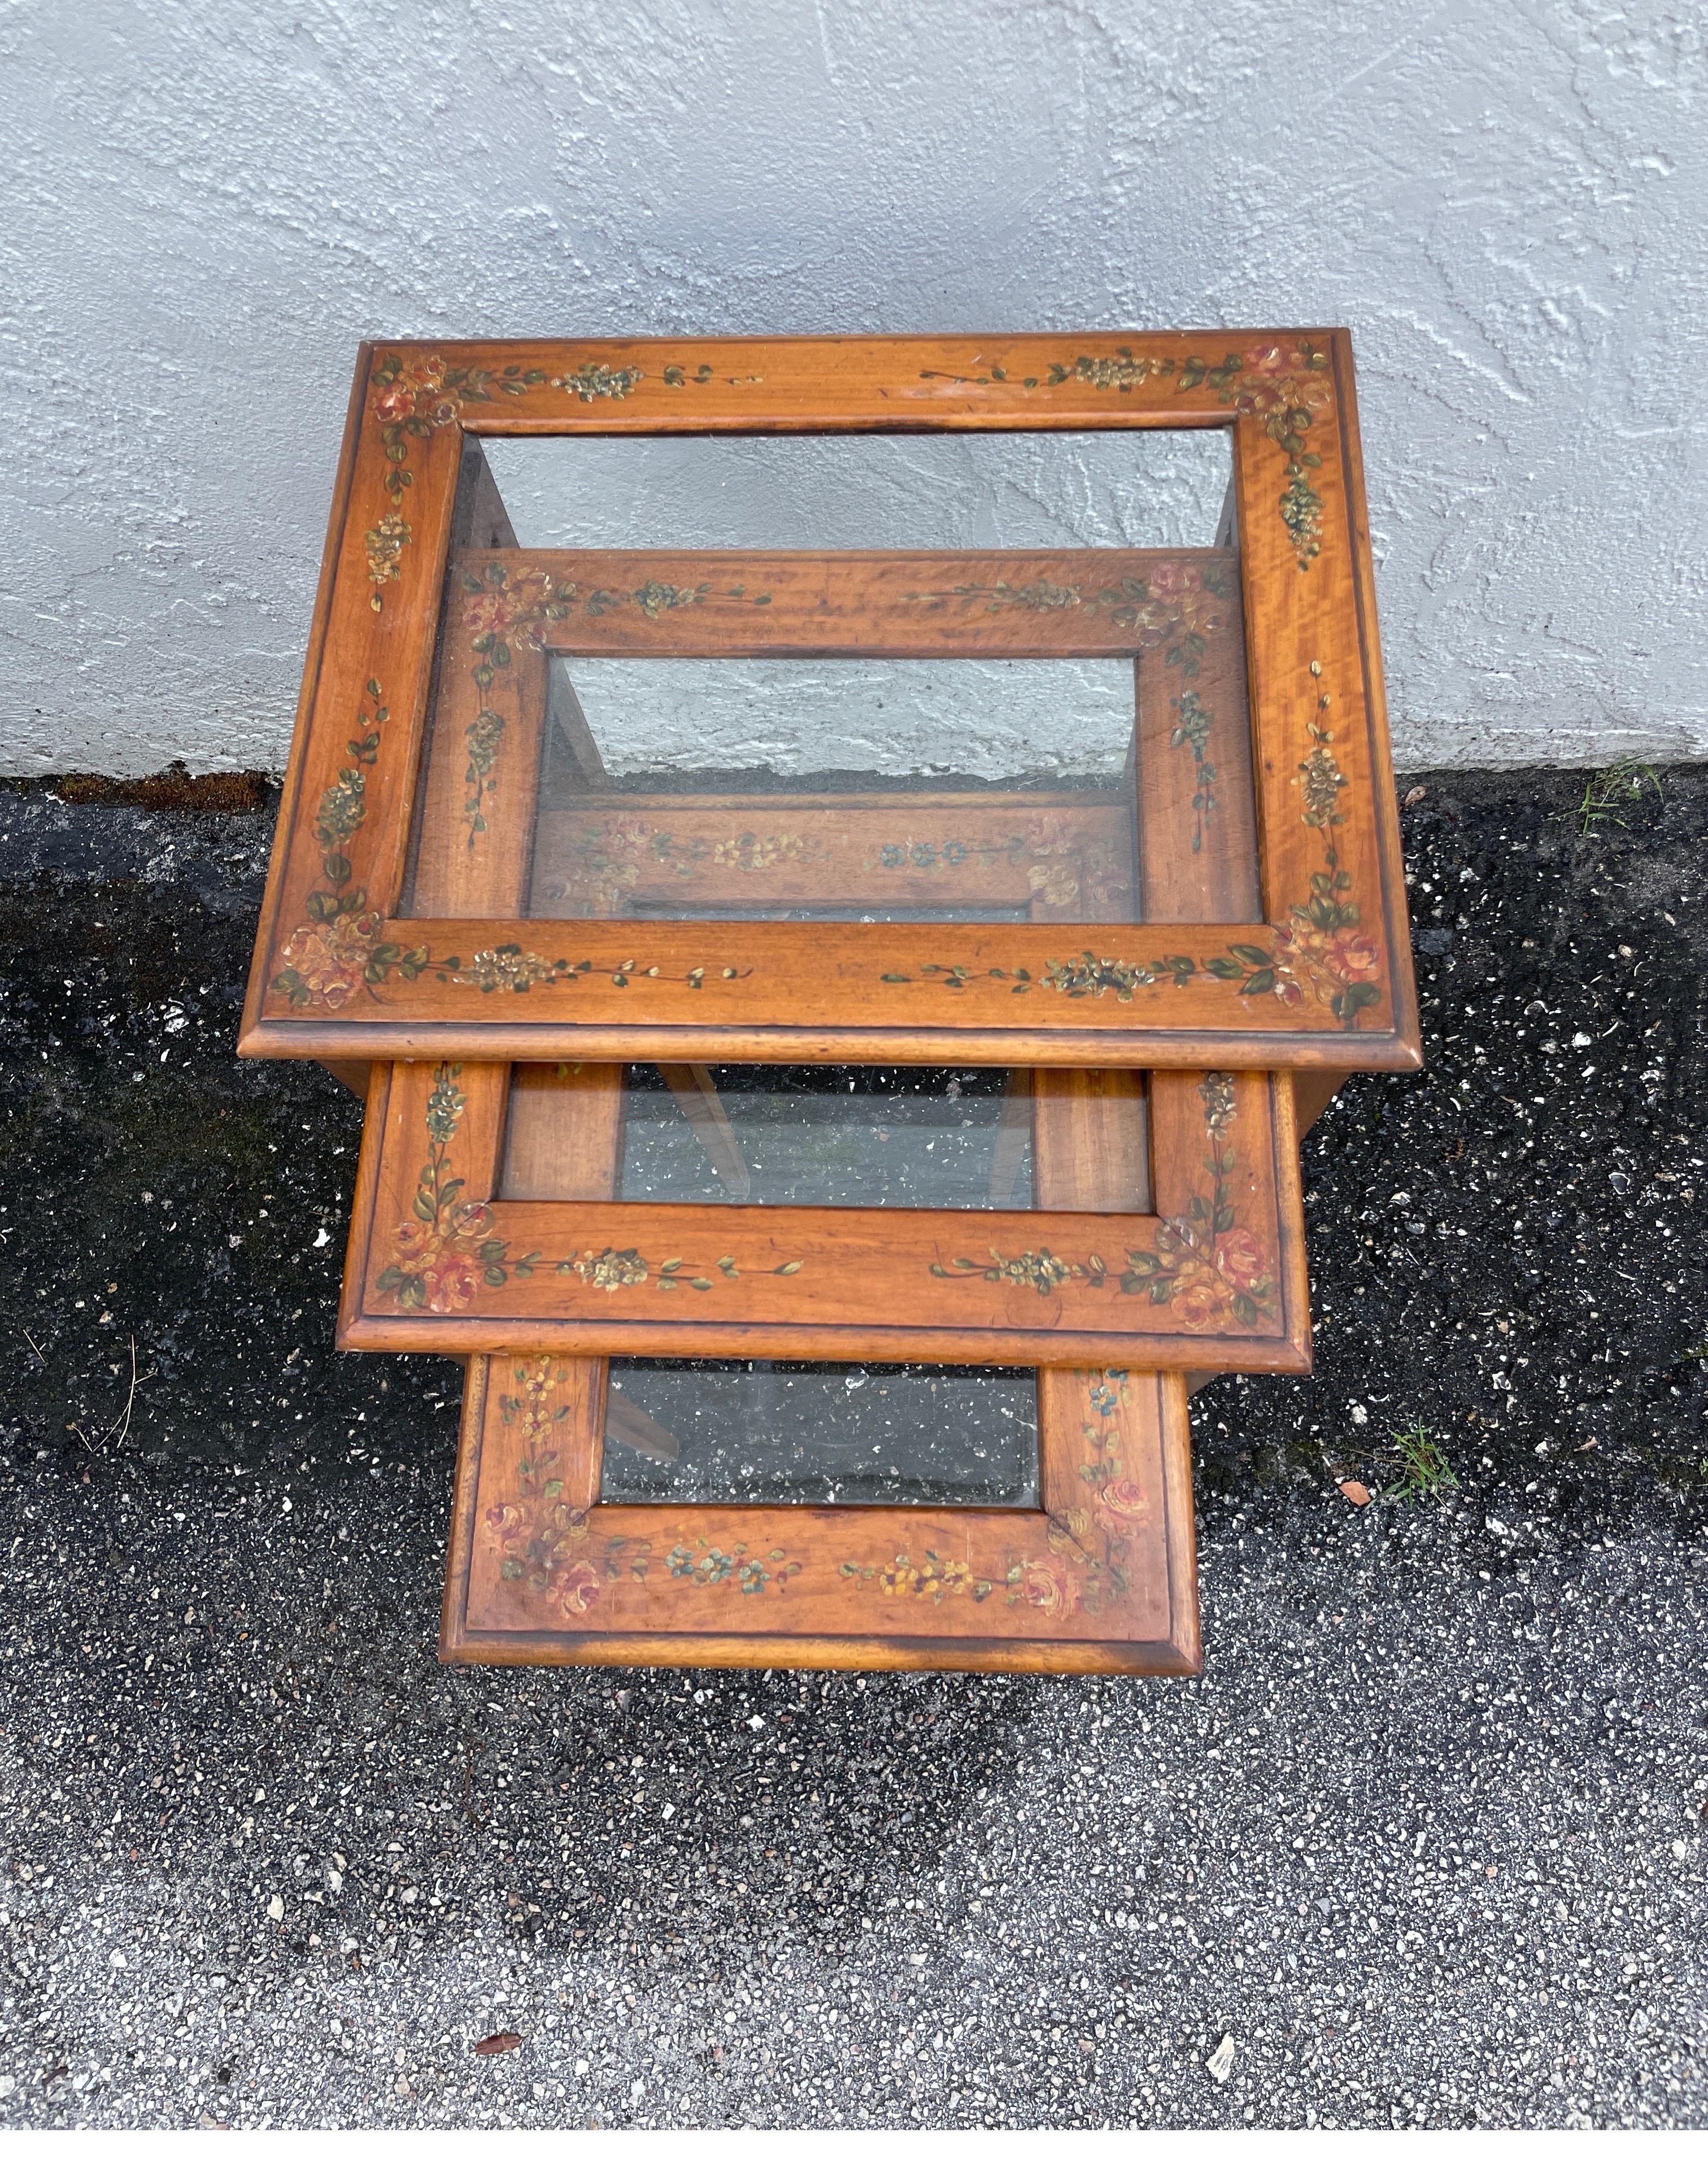 Sweet set of three Adam's Style nesting tables with glass inserts. The largest one measures 15